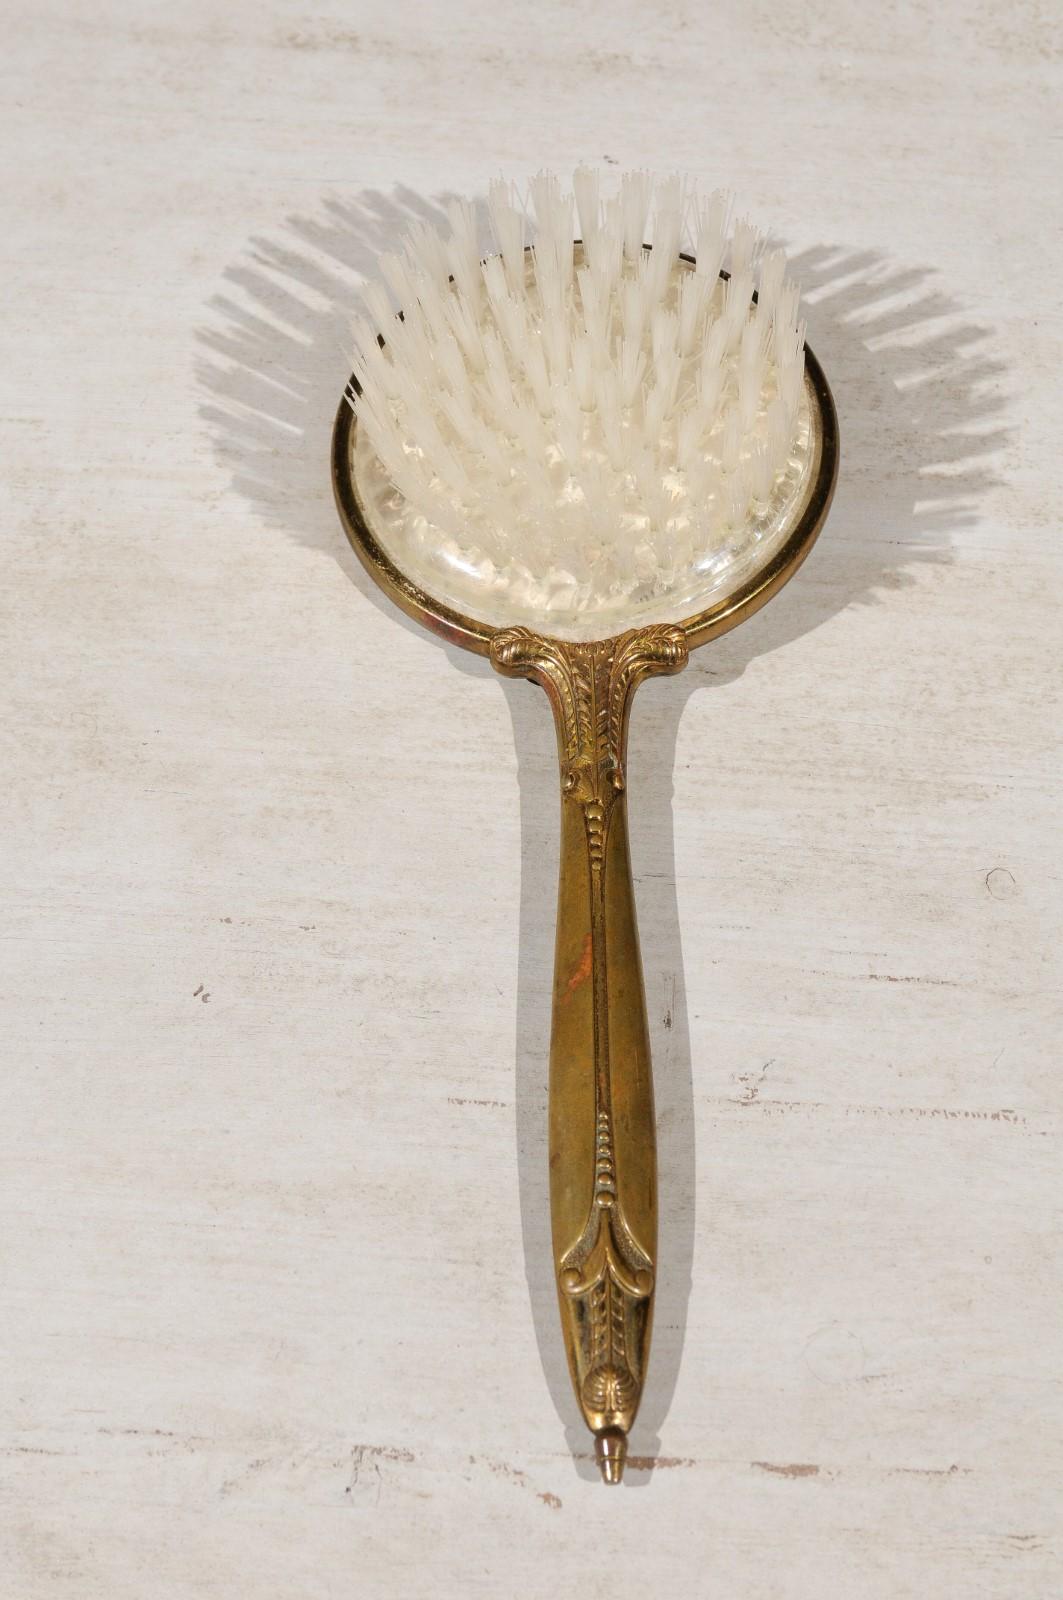 English Mirrored Hair Brush with Brass Finish, Filigree Décor and Medallion In Good Condition For Sale In Atlanta, GA